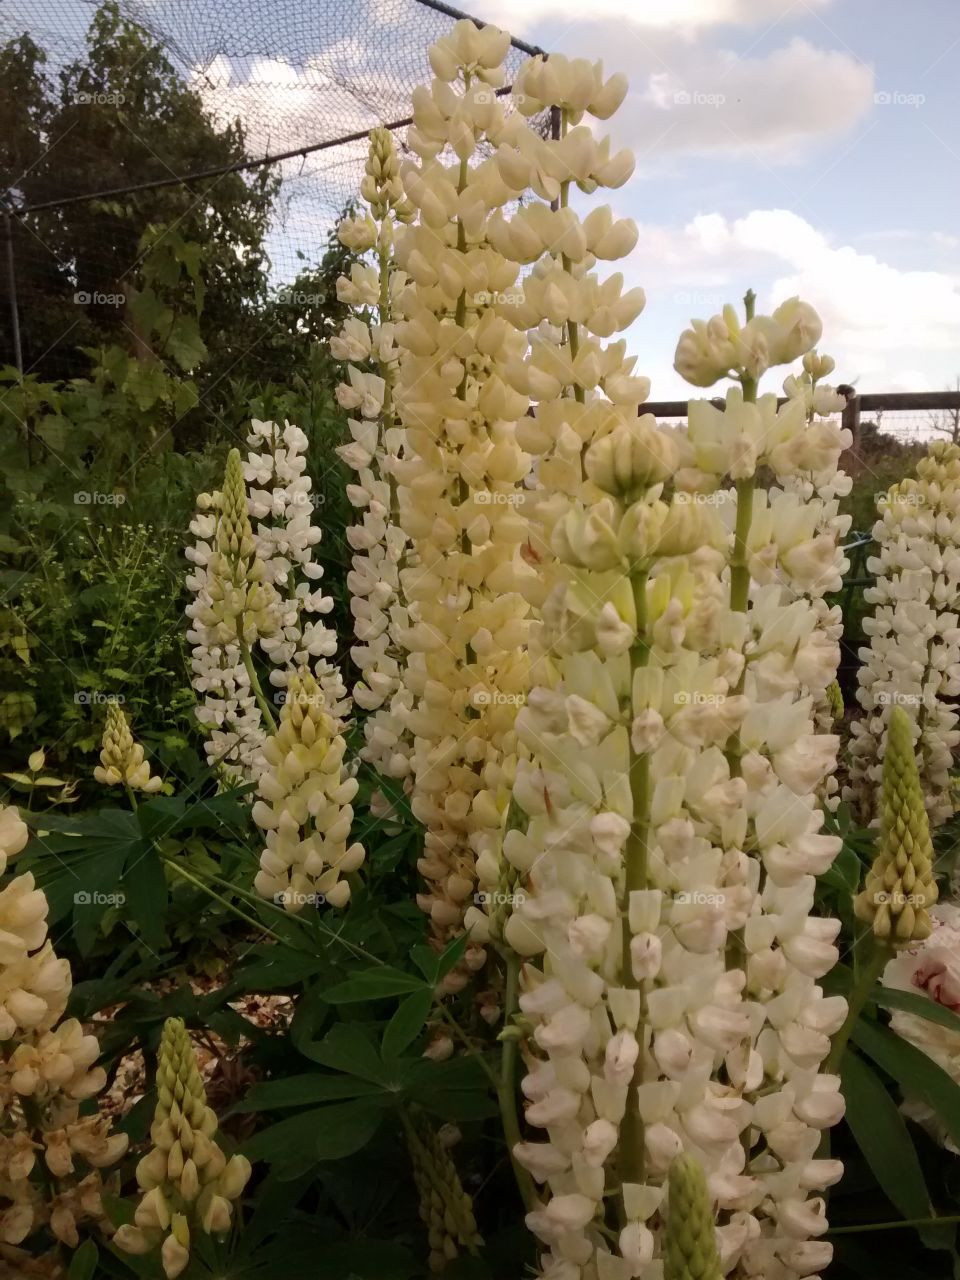 Lovely Lupins